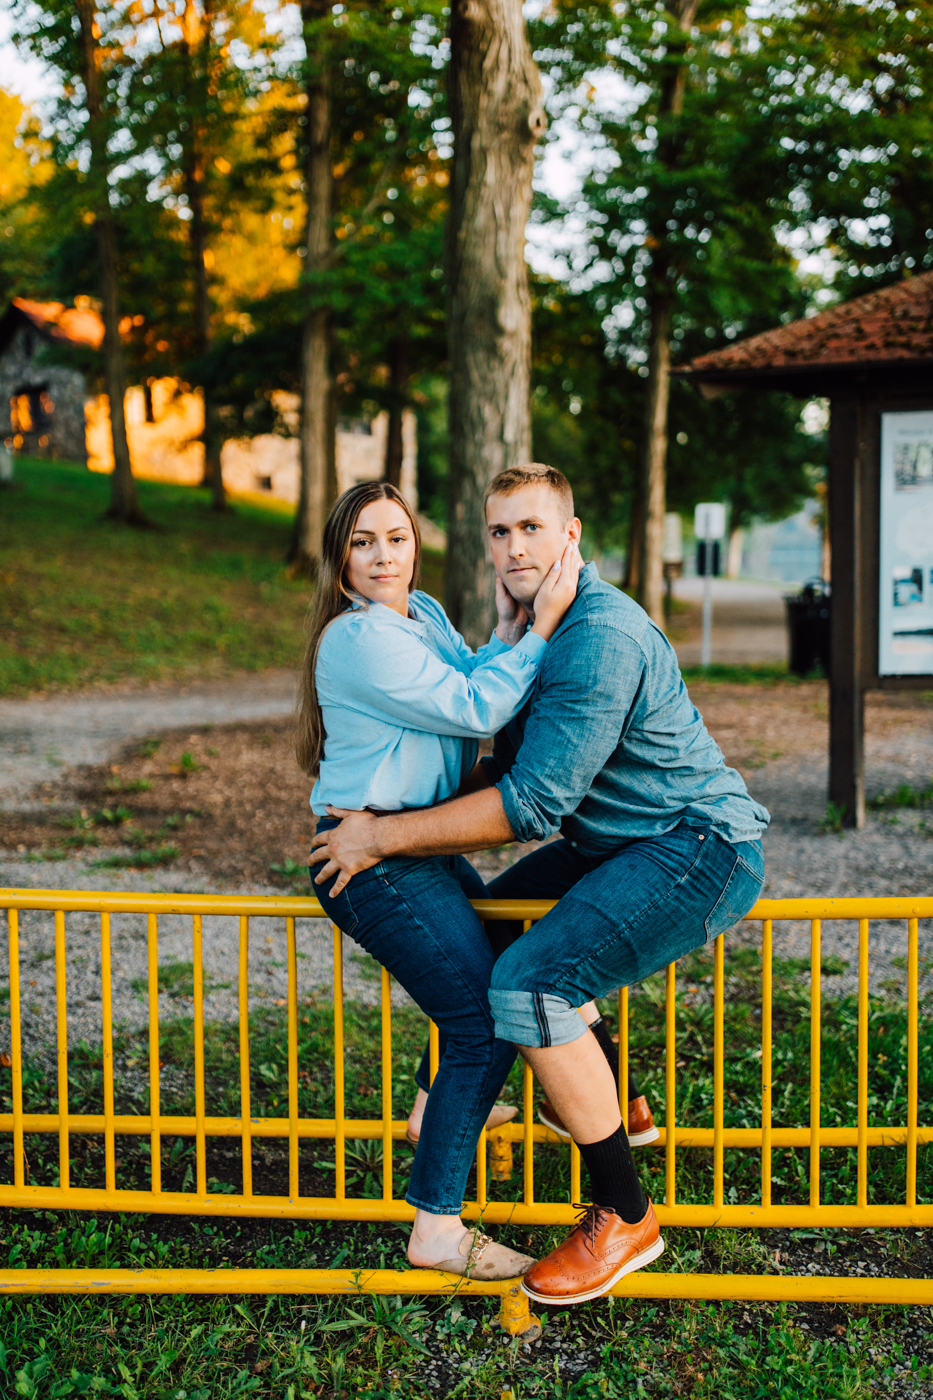  Engaged couple embraces while straddling a bike rack during their awkward photoshoot wearing all denim outfits 